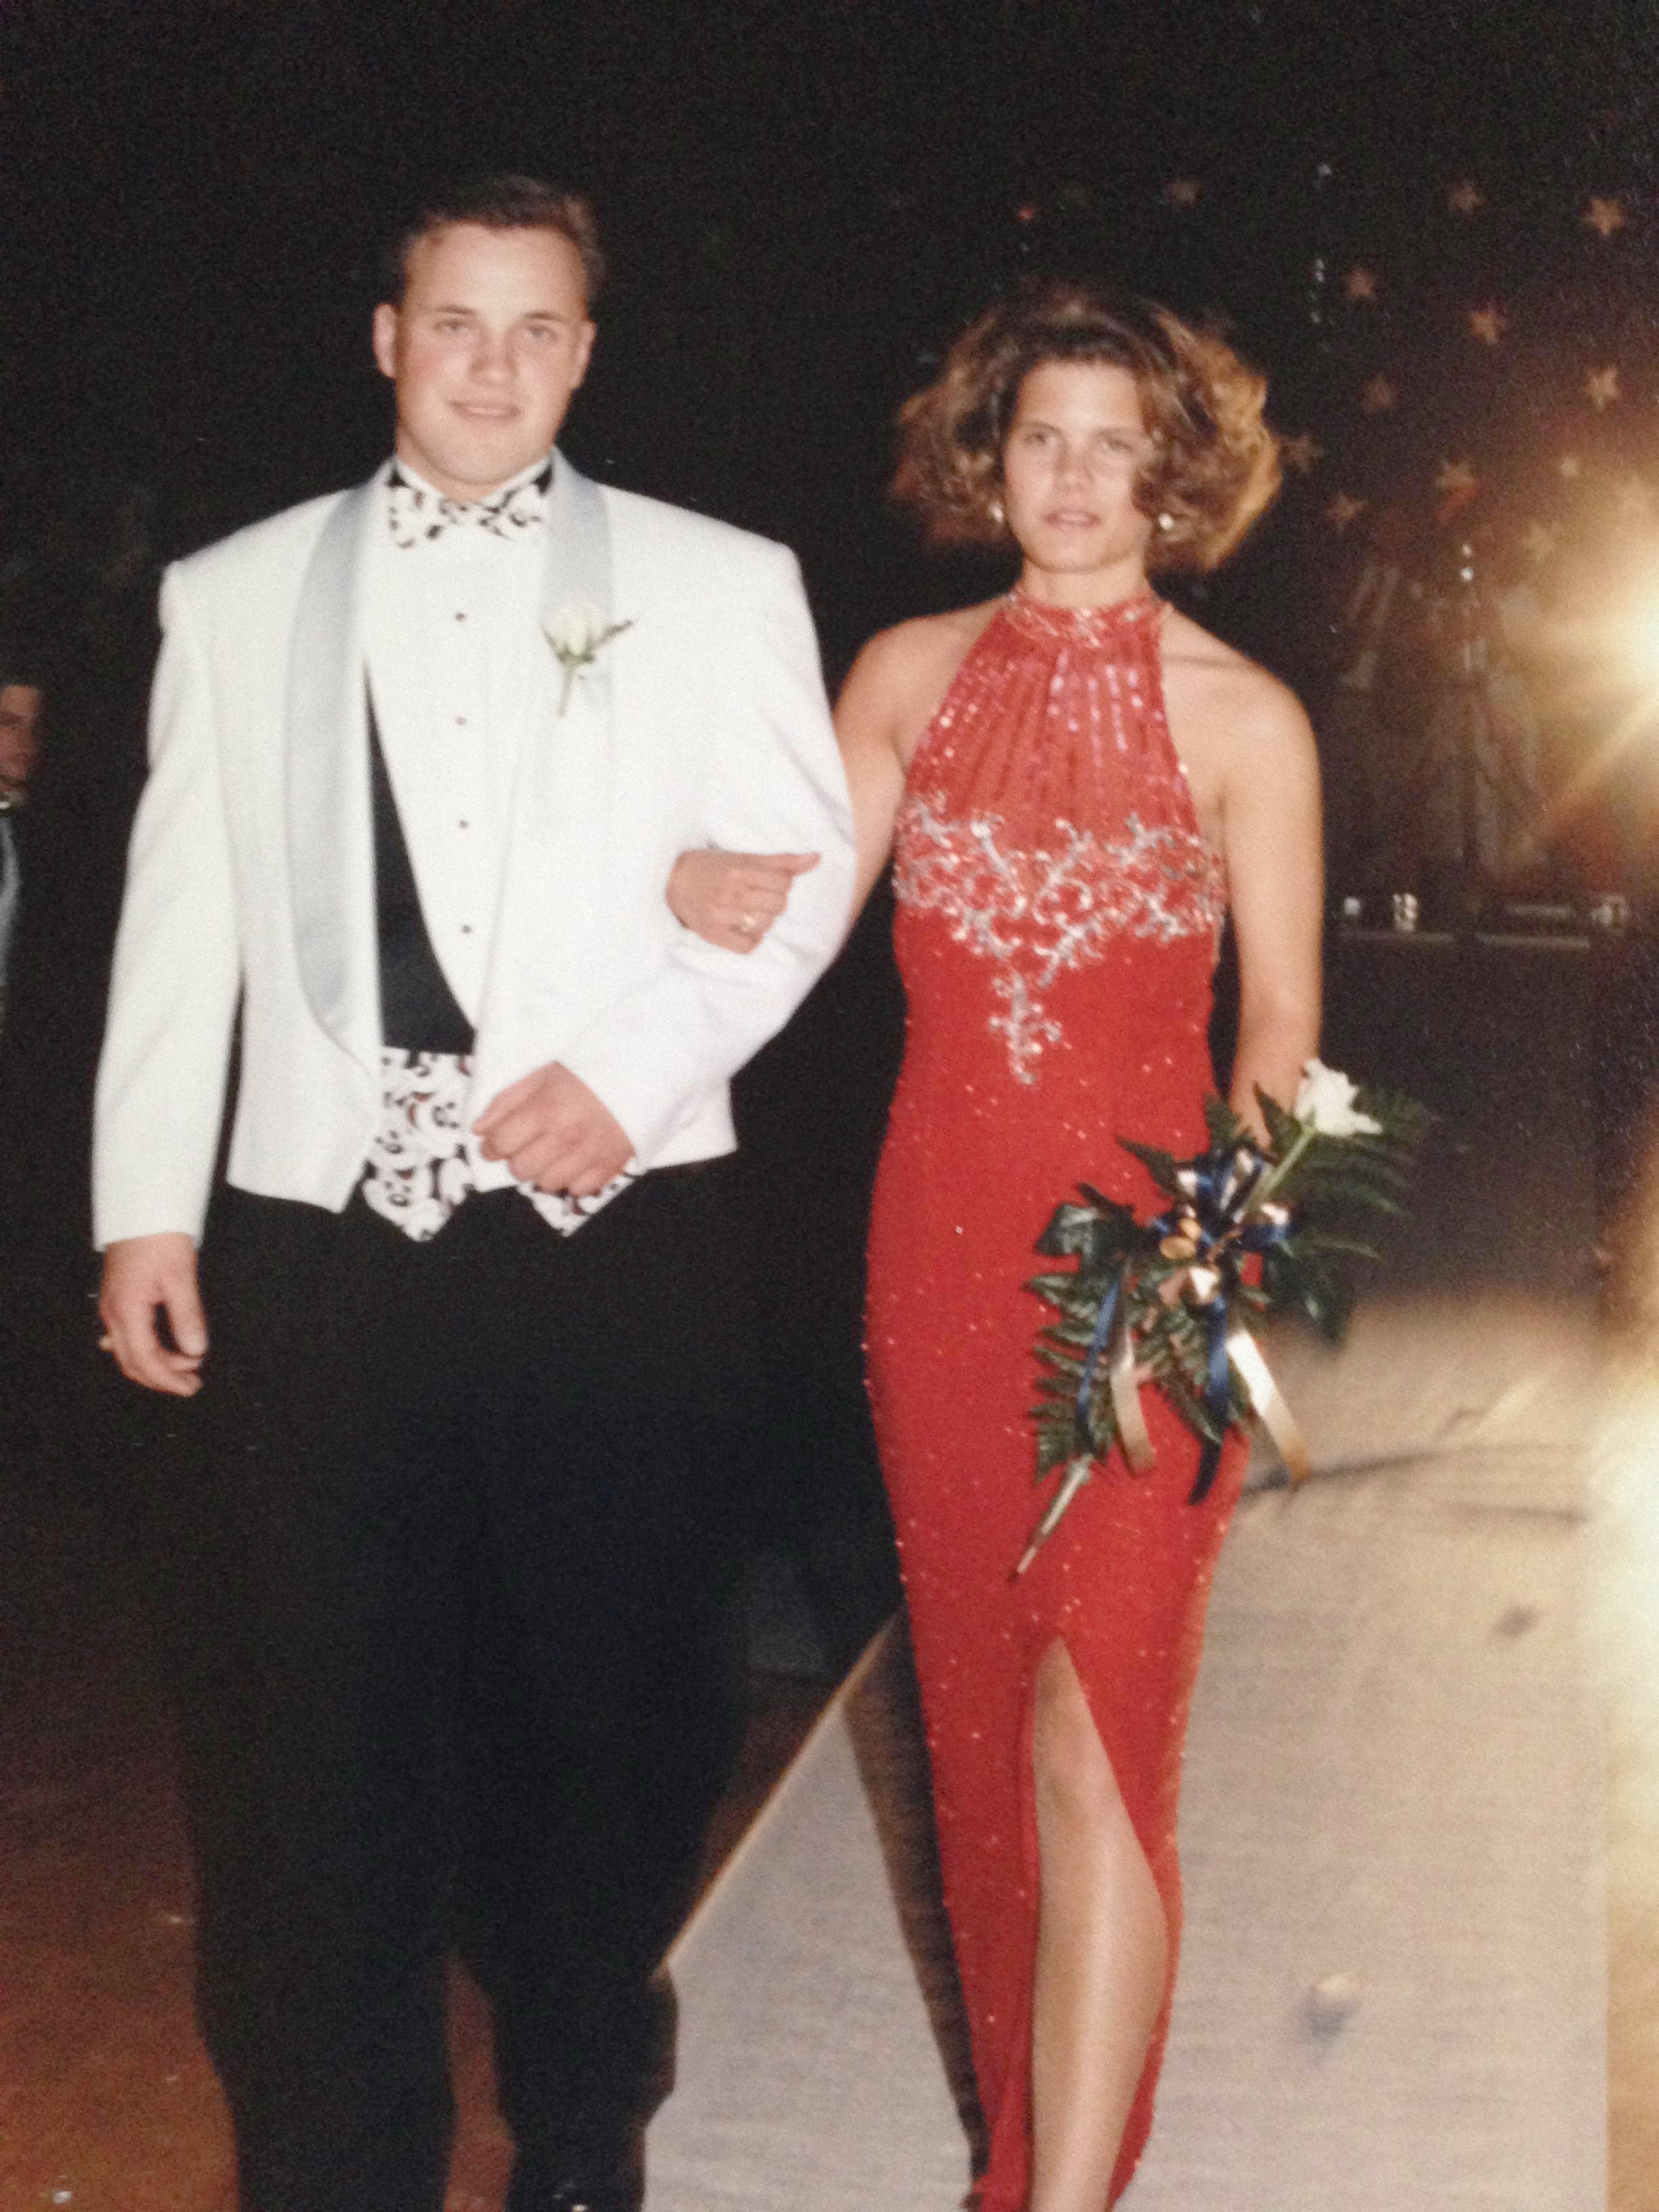 Jana Shortal as prom queen with a male prom goer on her arm